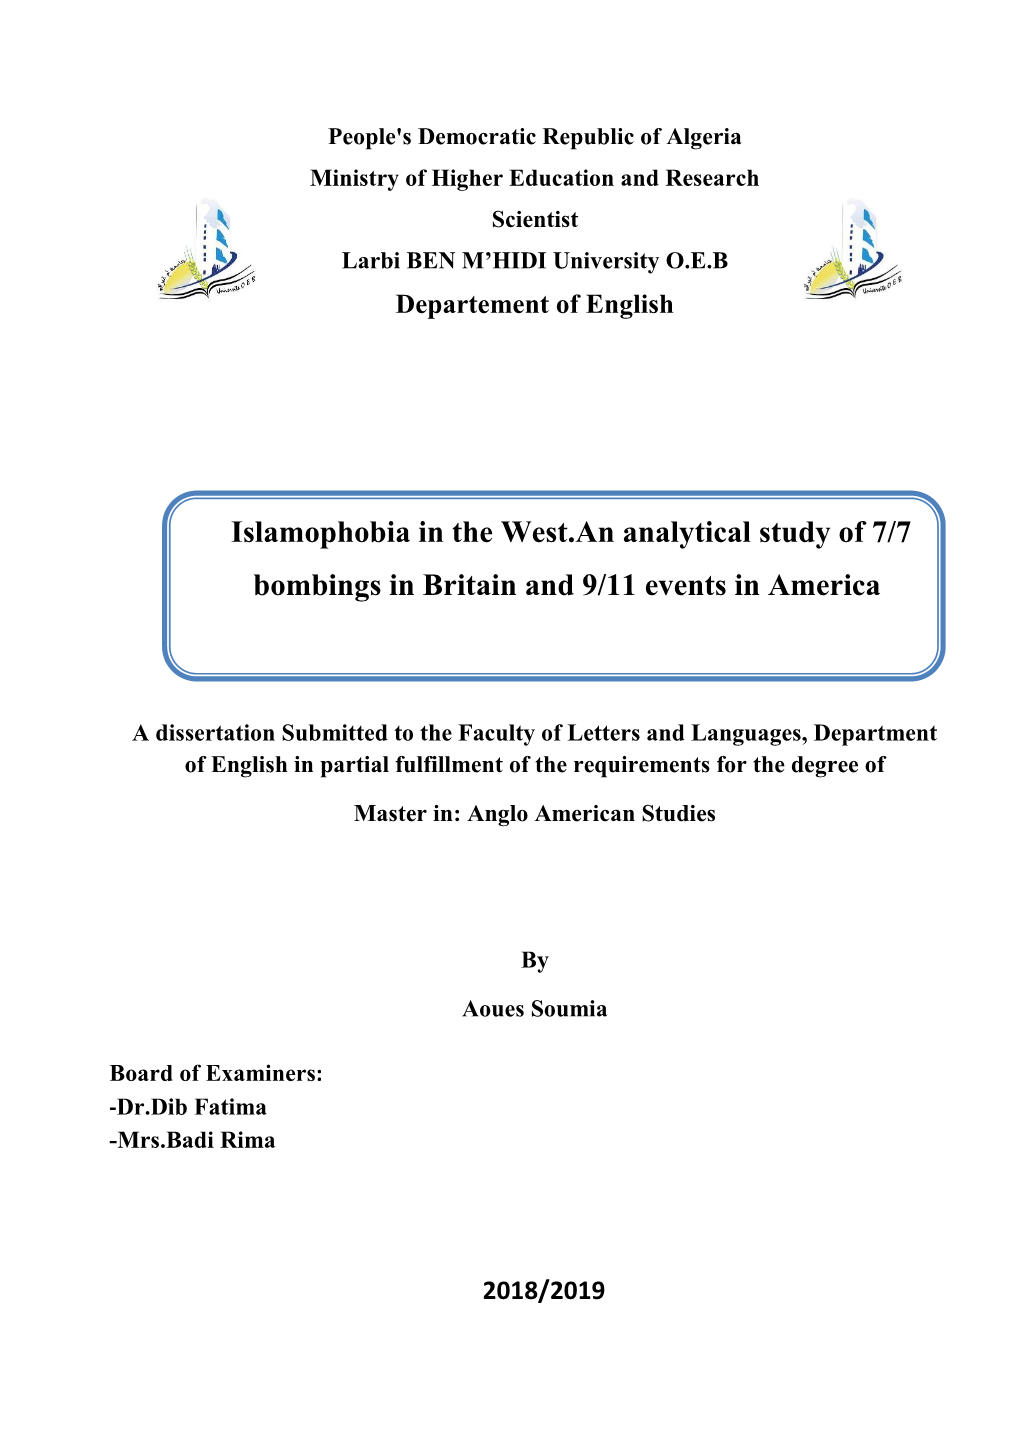 Islamophobia in the West.An Analytical Study of 7/7 Bombings in Britain and 9/11 Events in America